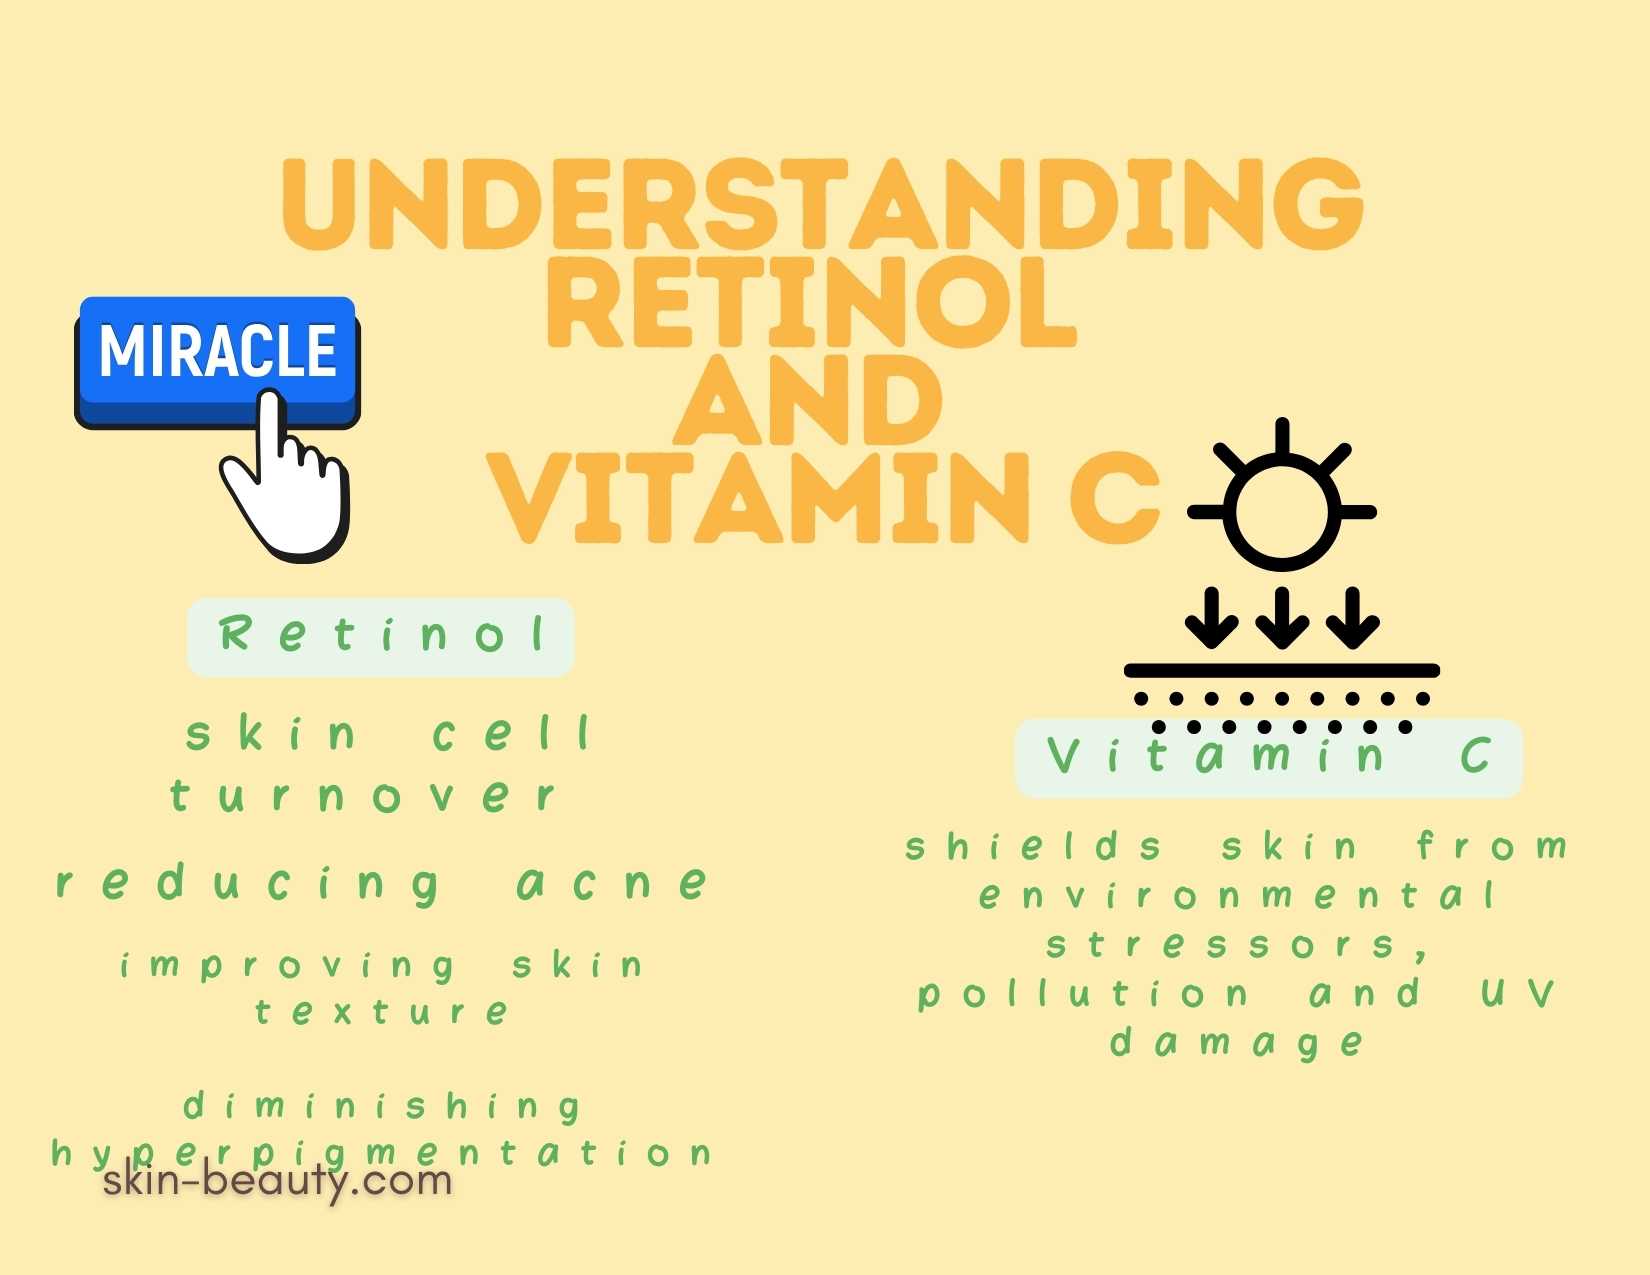 Can You Combine Vitamin C and Retinol for Skin Care Benefits?